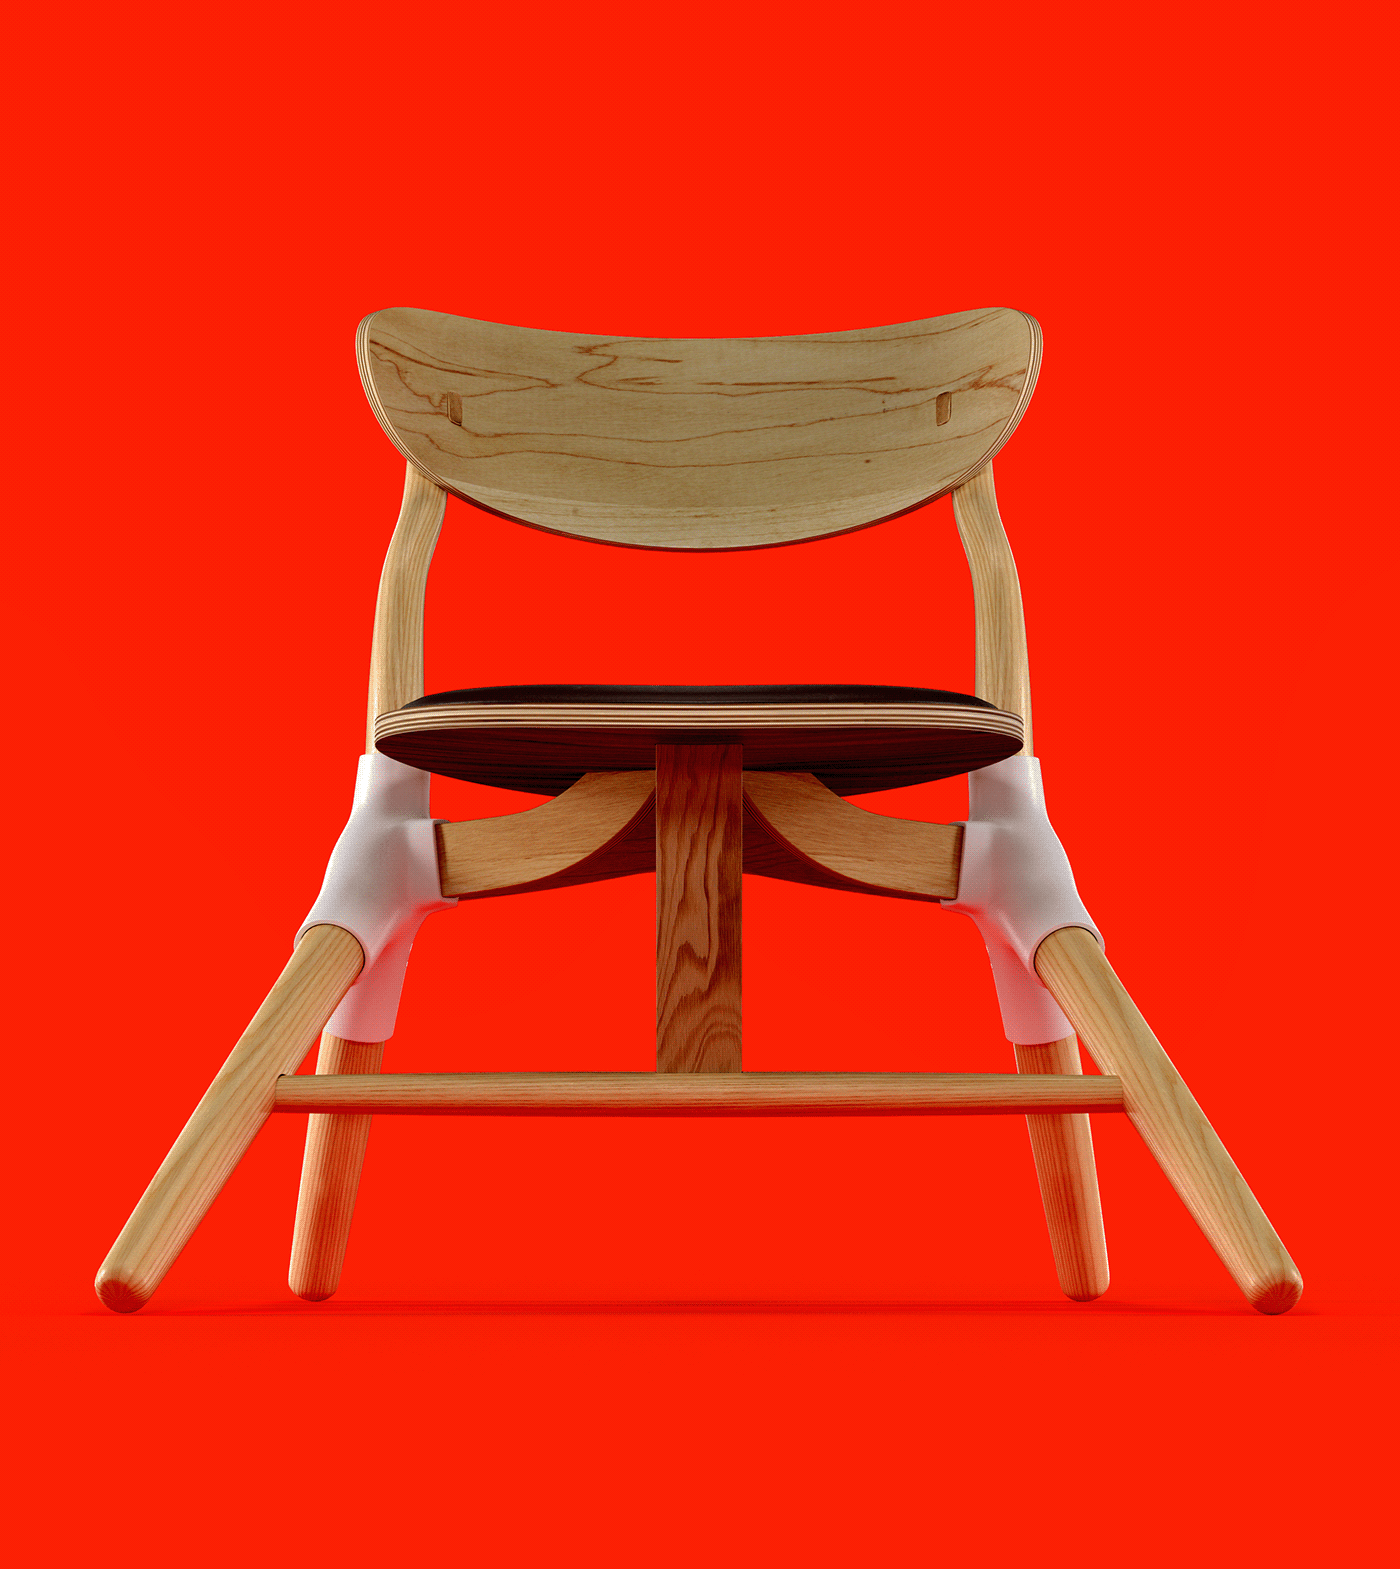 chair plastic wood orange red concept 3ds max photoshop furniture White